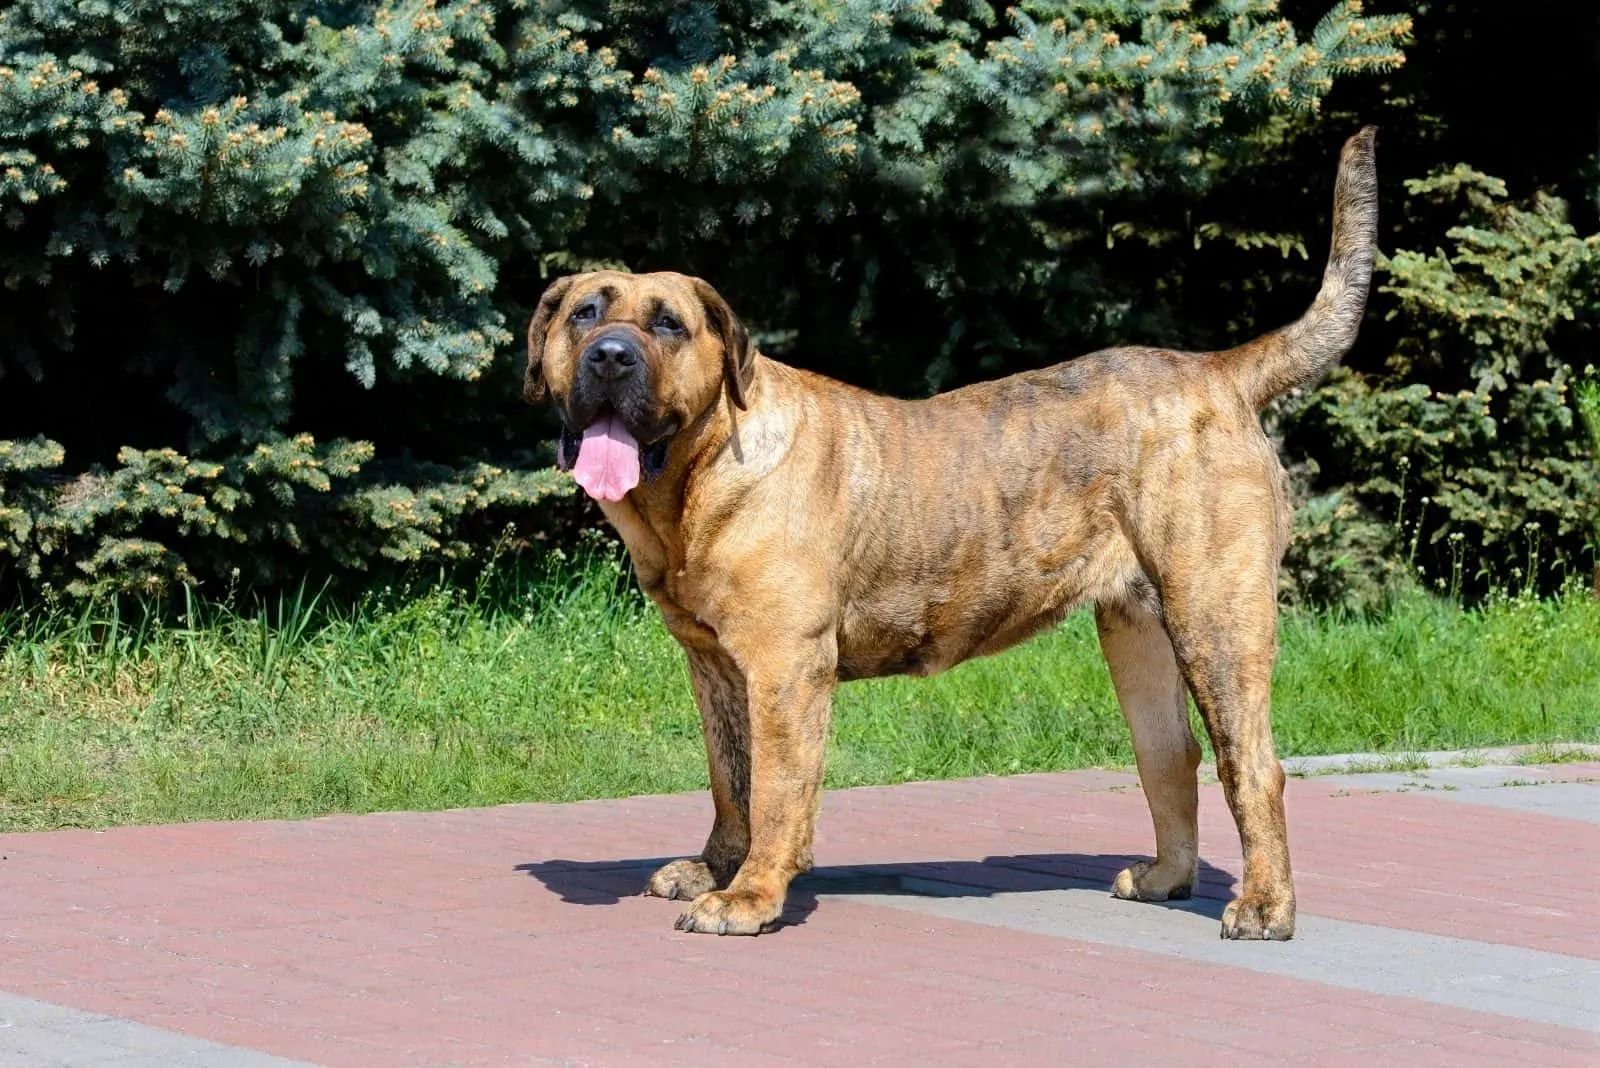 presa canario looks at the camera standing in the park's road